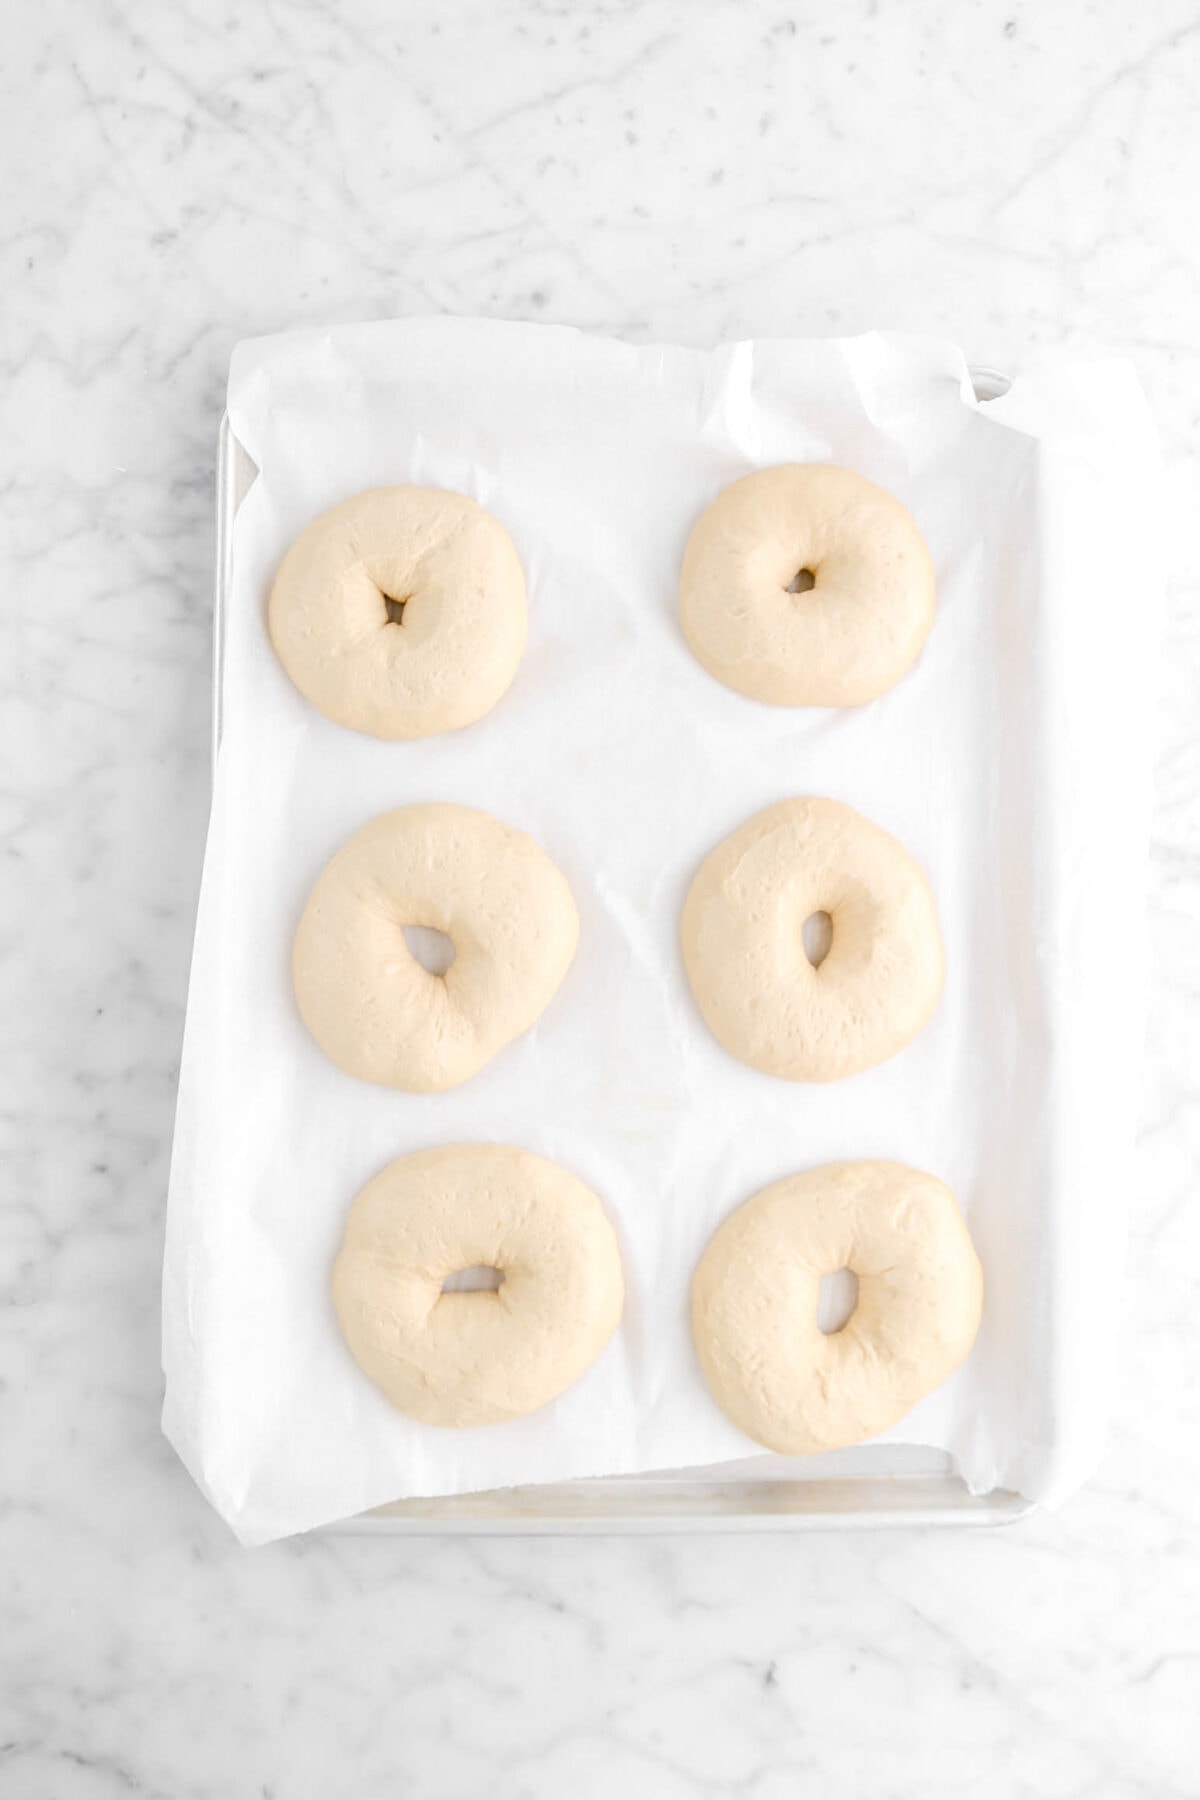 six proved bagels on sheet pan